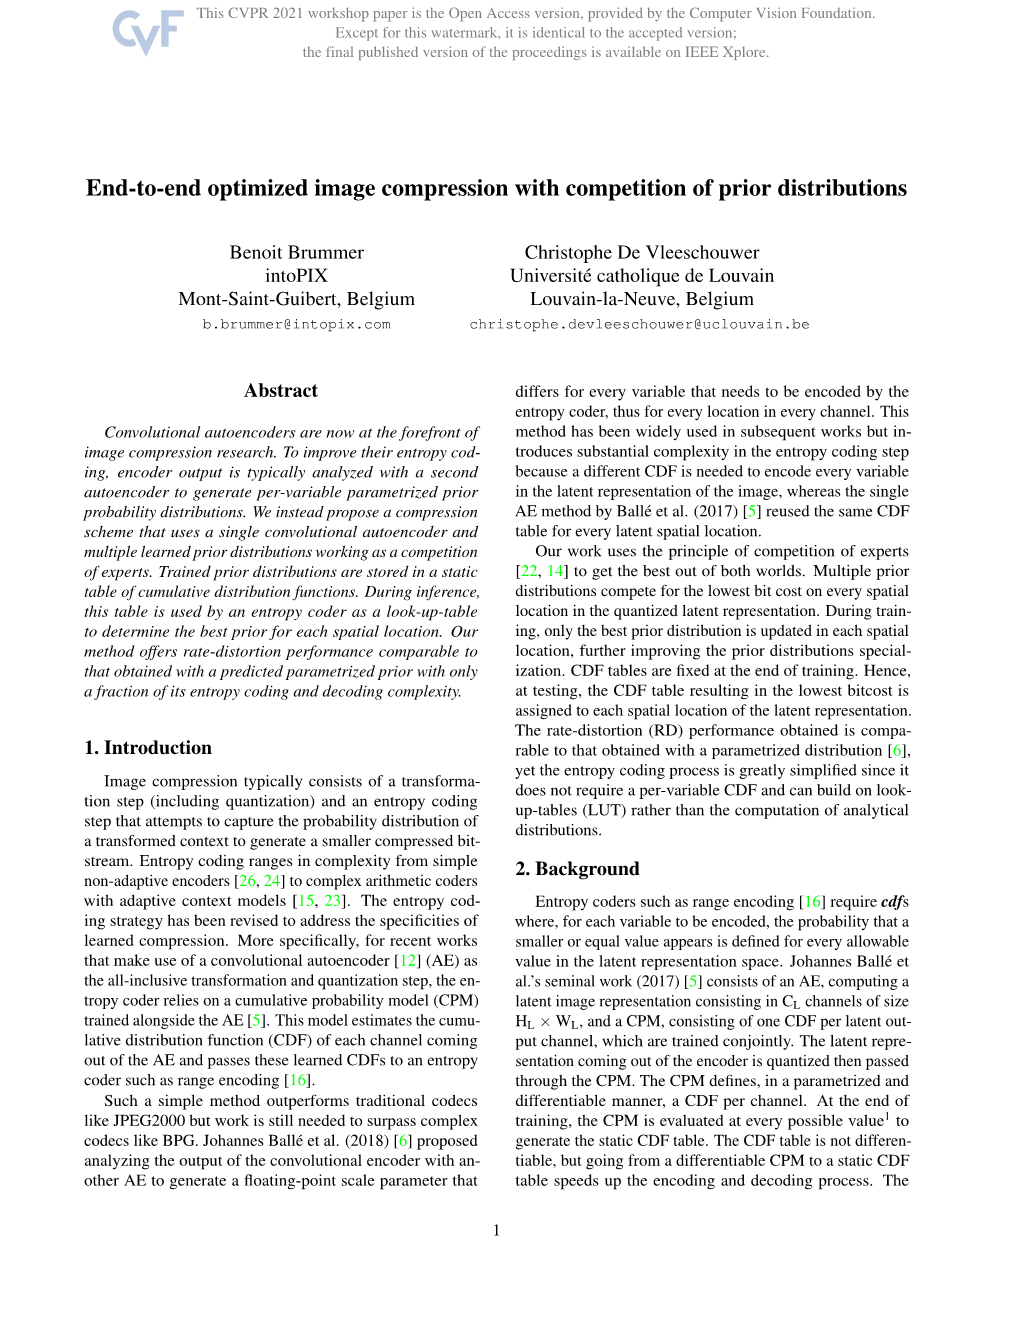 End-To-End Optimized Image Compression with Competition of Prior Distributions